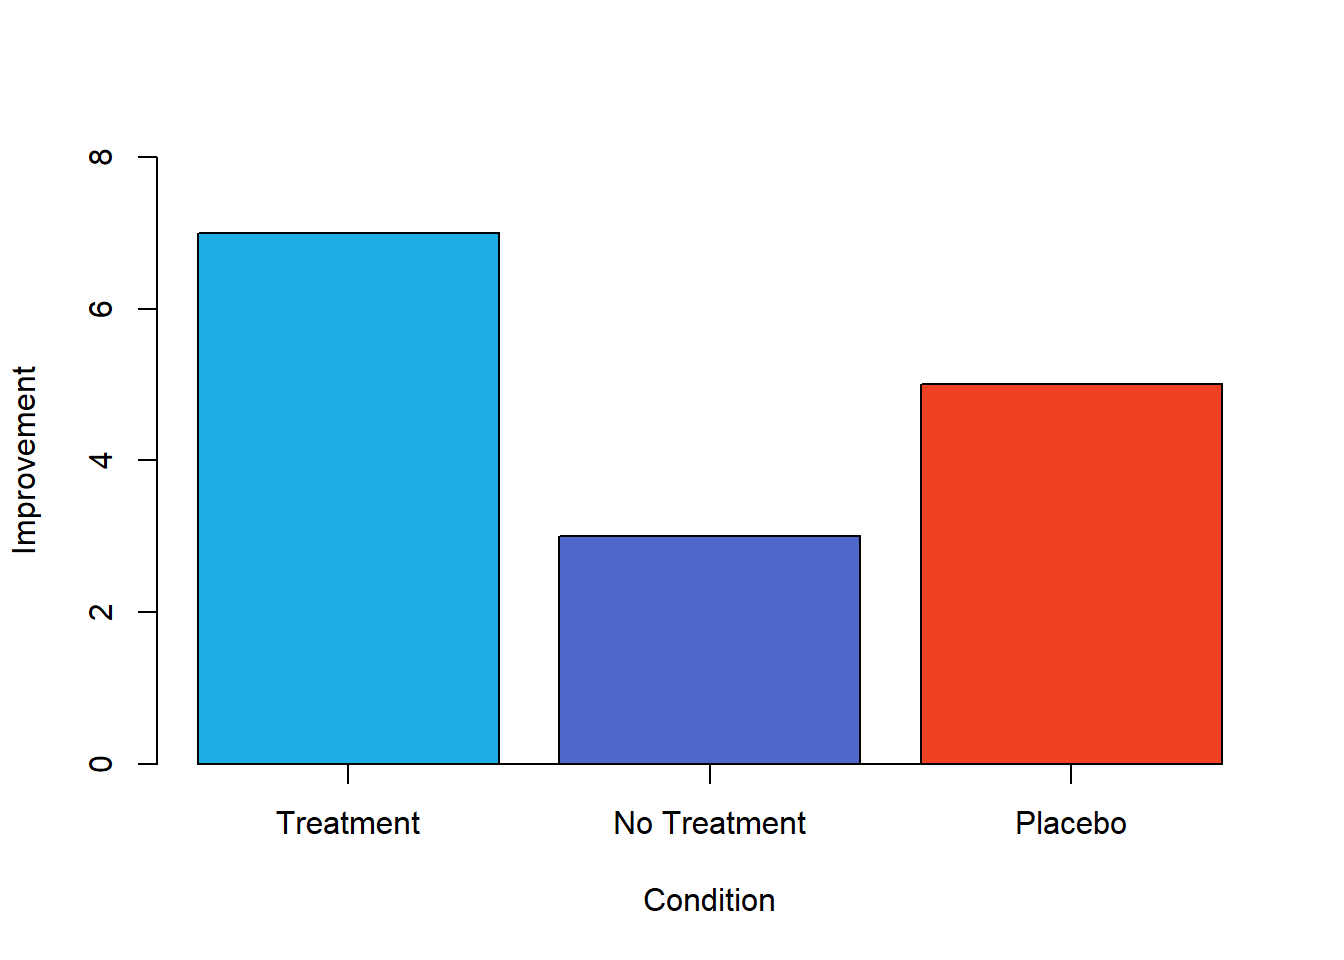 Hypothetical results from a study including treatment, no-treatment, and placebo conditions.